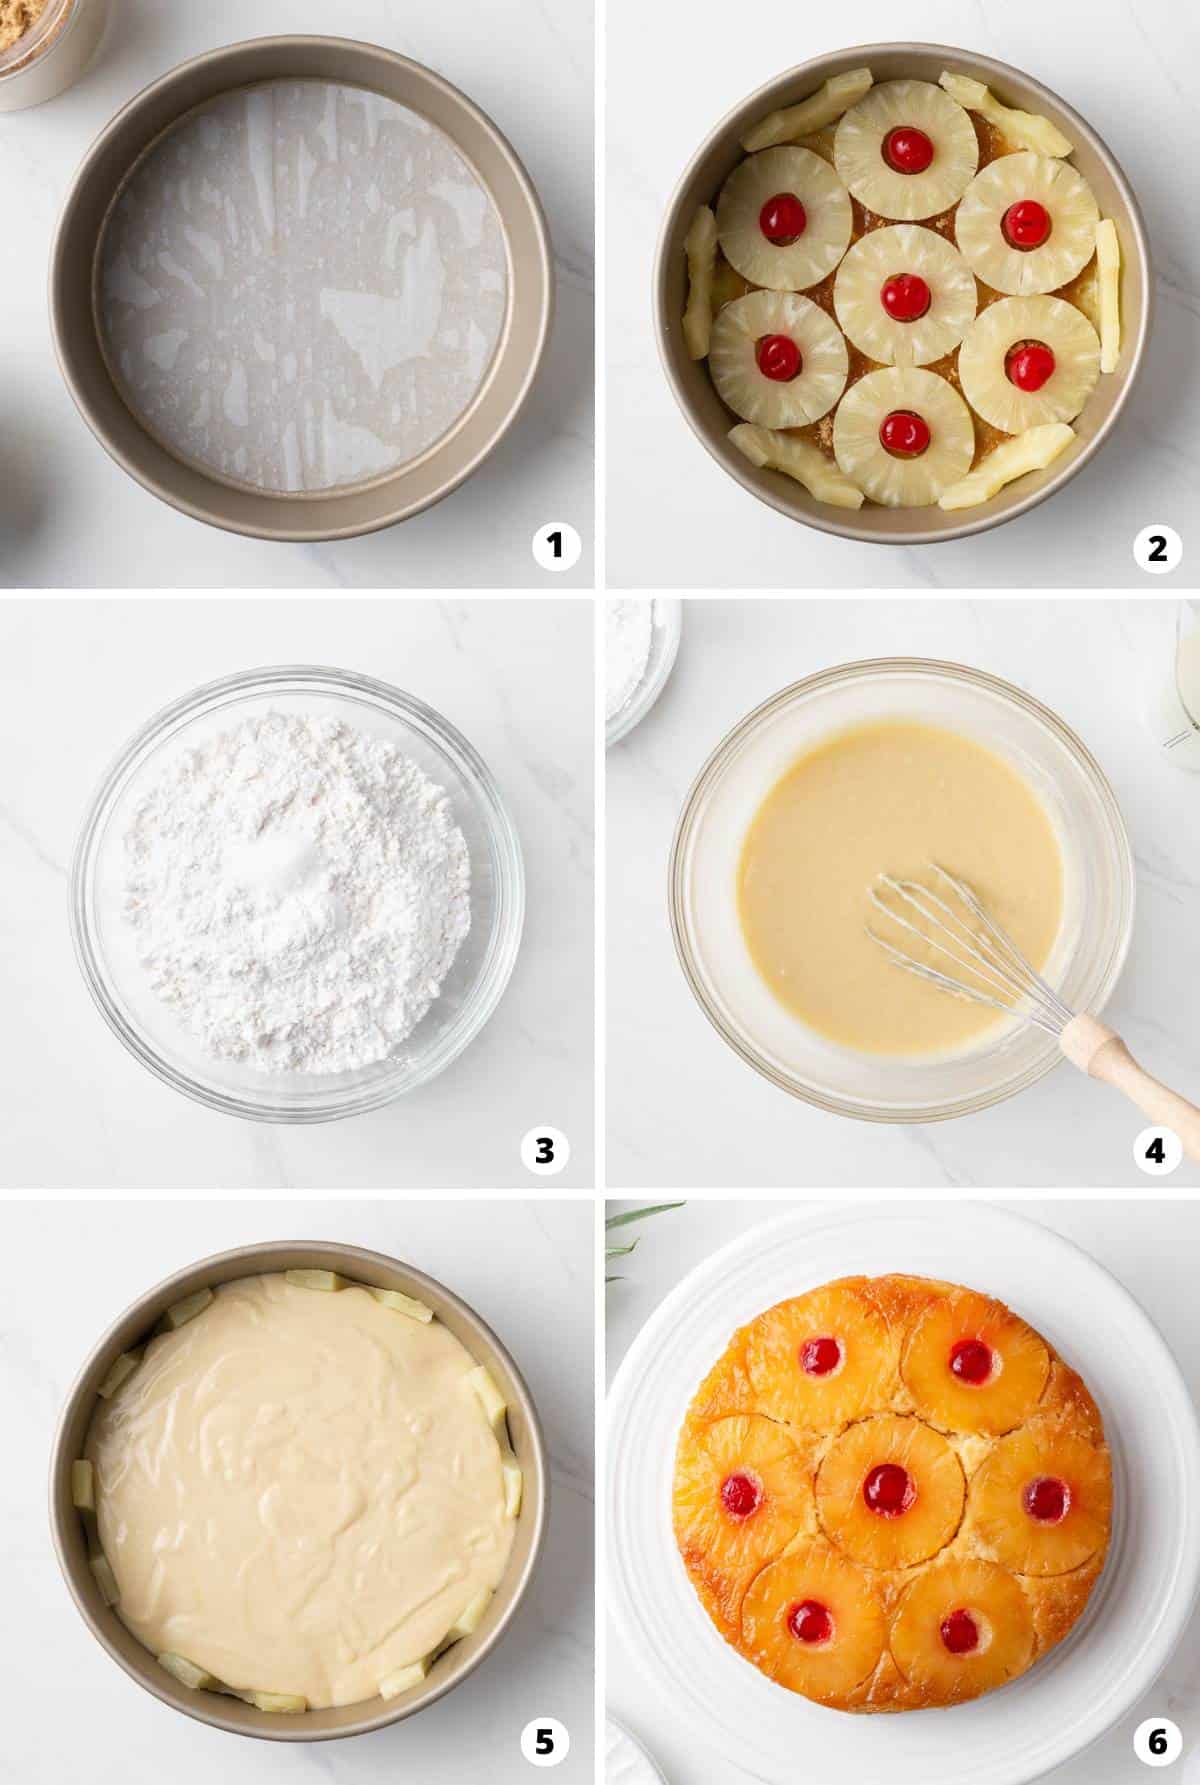 Showing how to make pineapple upside down cake in a 6 step collage.